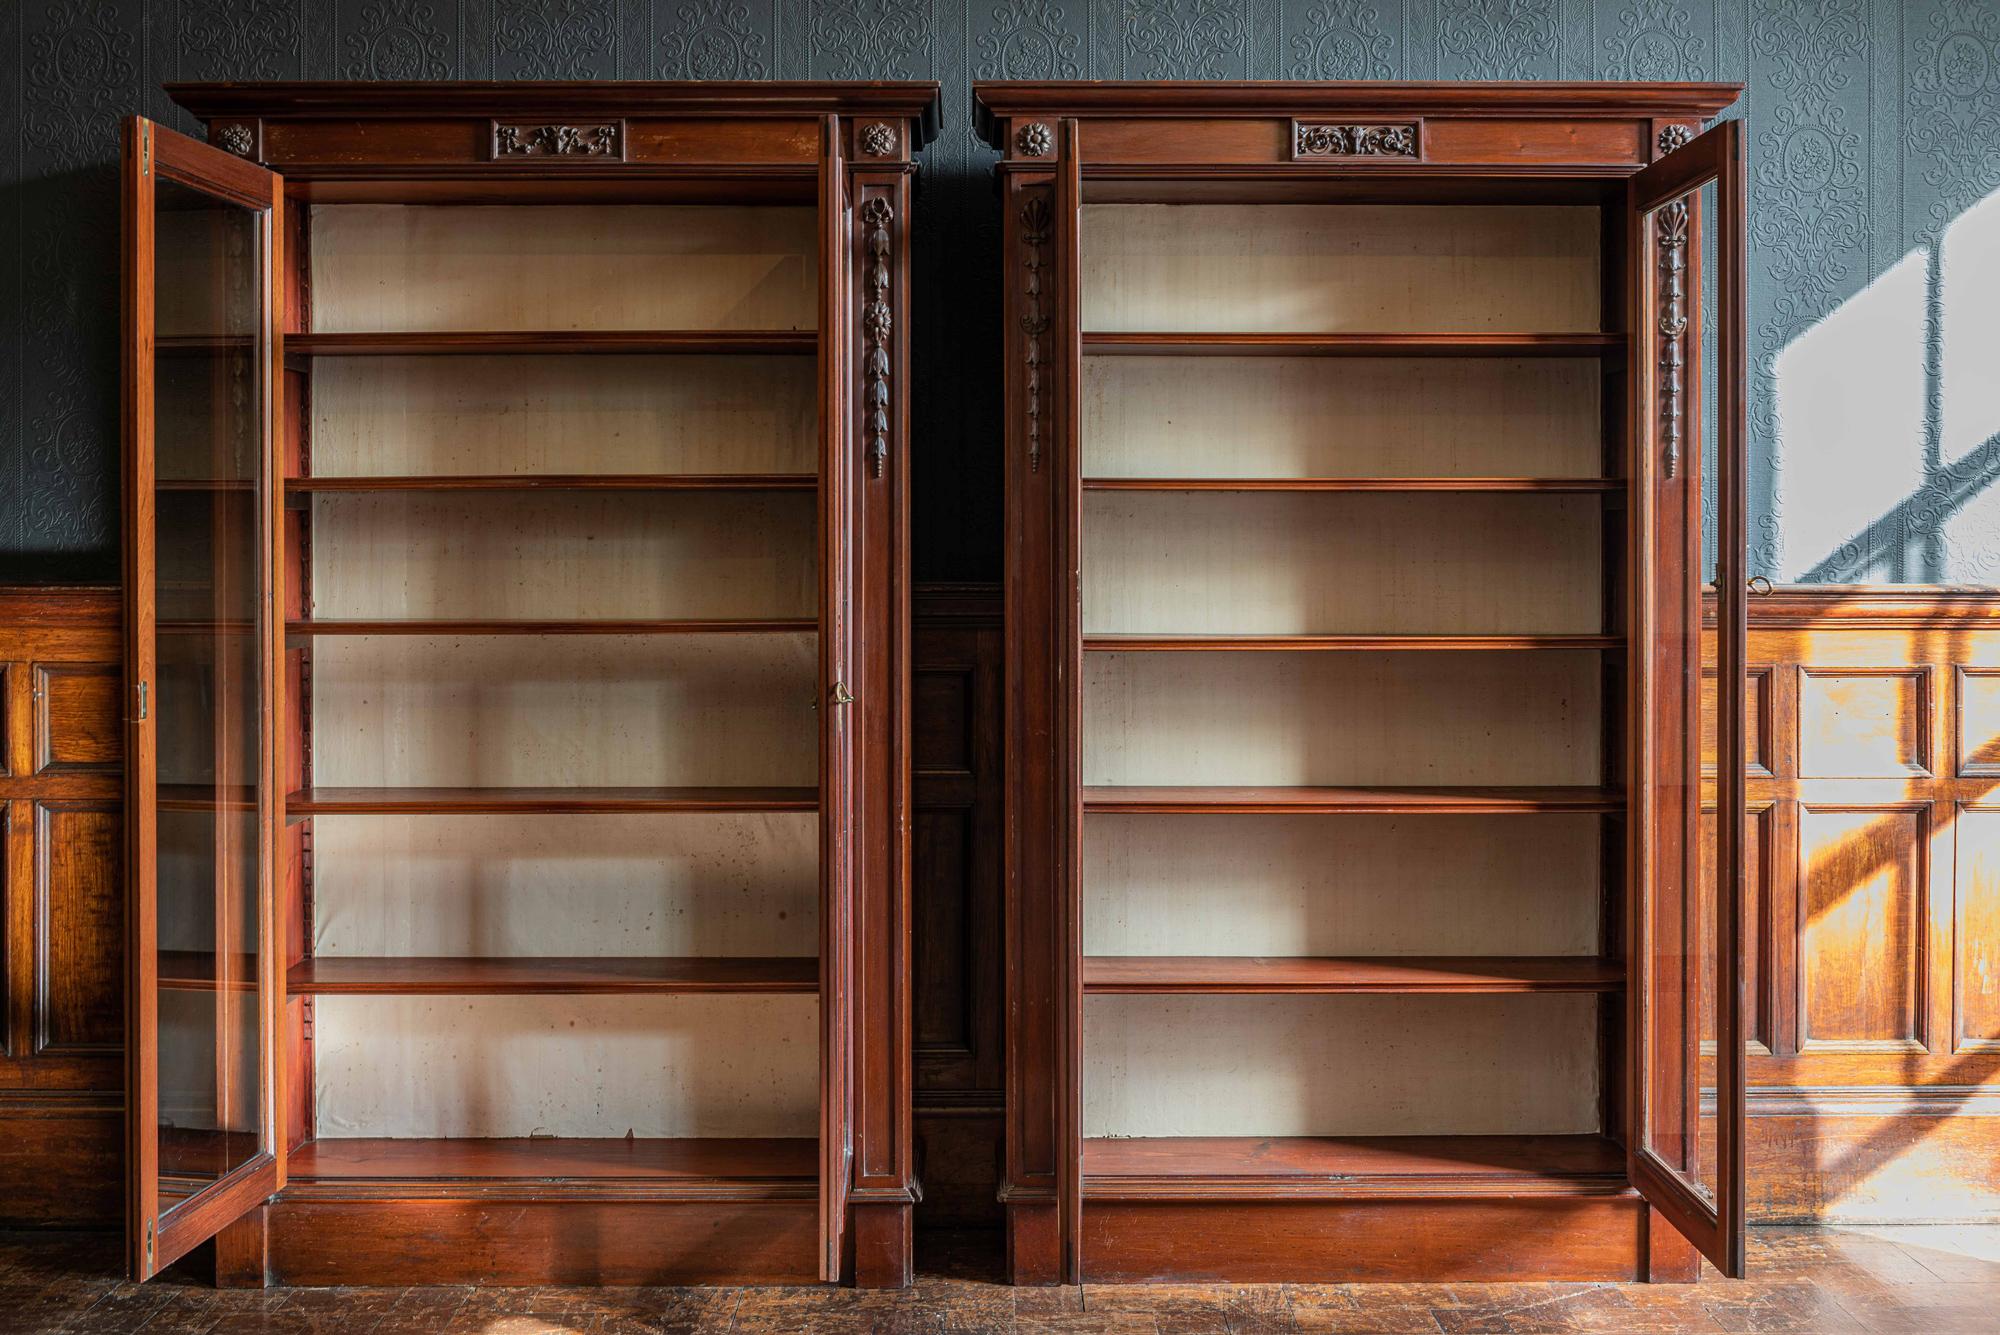 Pair of English country house solid mahogany glazed bookcases,
circa 1900.

A near pair of country house mahogany glazed bookcases, with adjustable shelves, the moulded cornice over a frieze, decorated to the center with a ram's head amongst